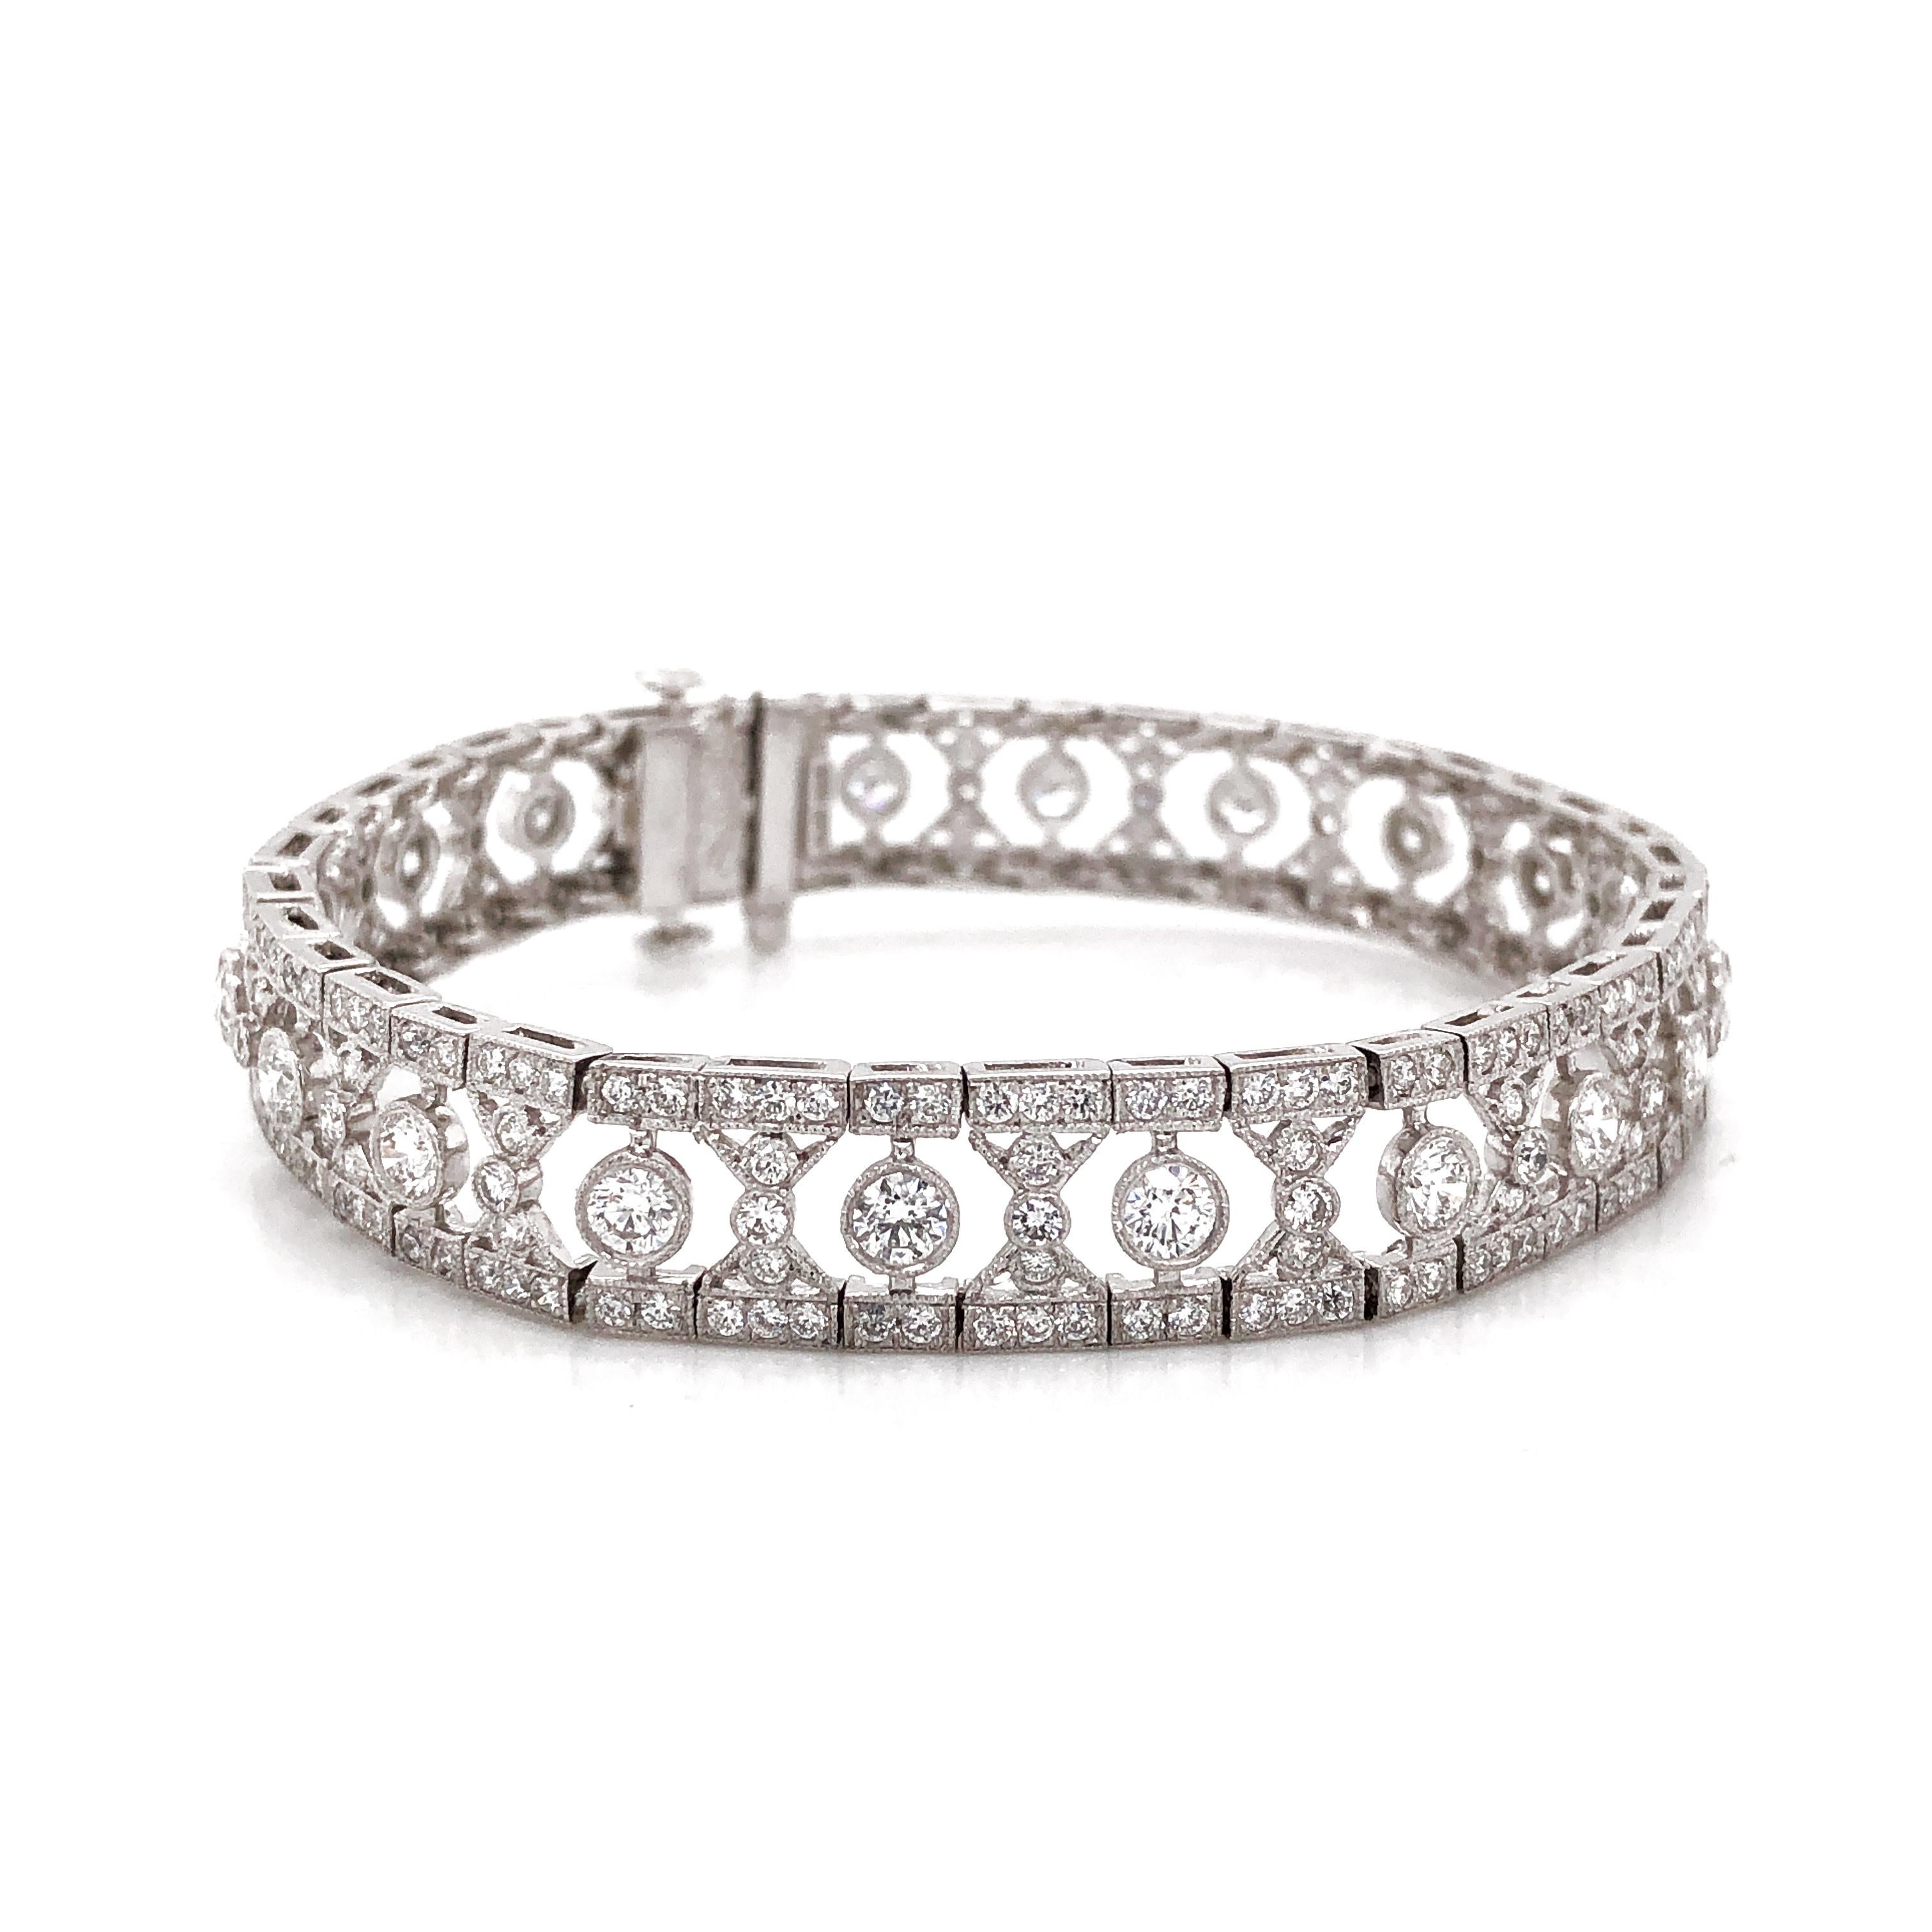 Art Deco Inspired Round Cut Diamonds 6.12 Carat Platinum Bracelet In New Condition For Sale In New York, NY